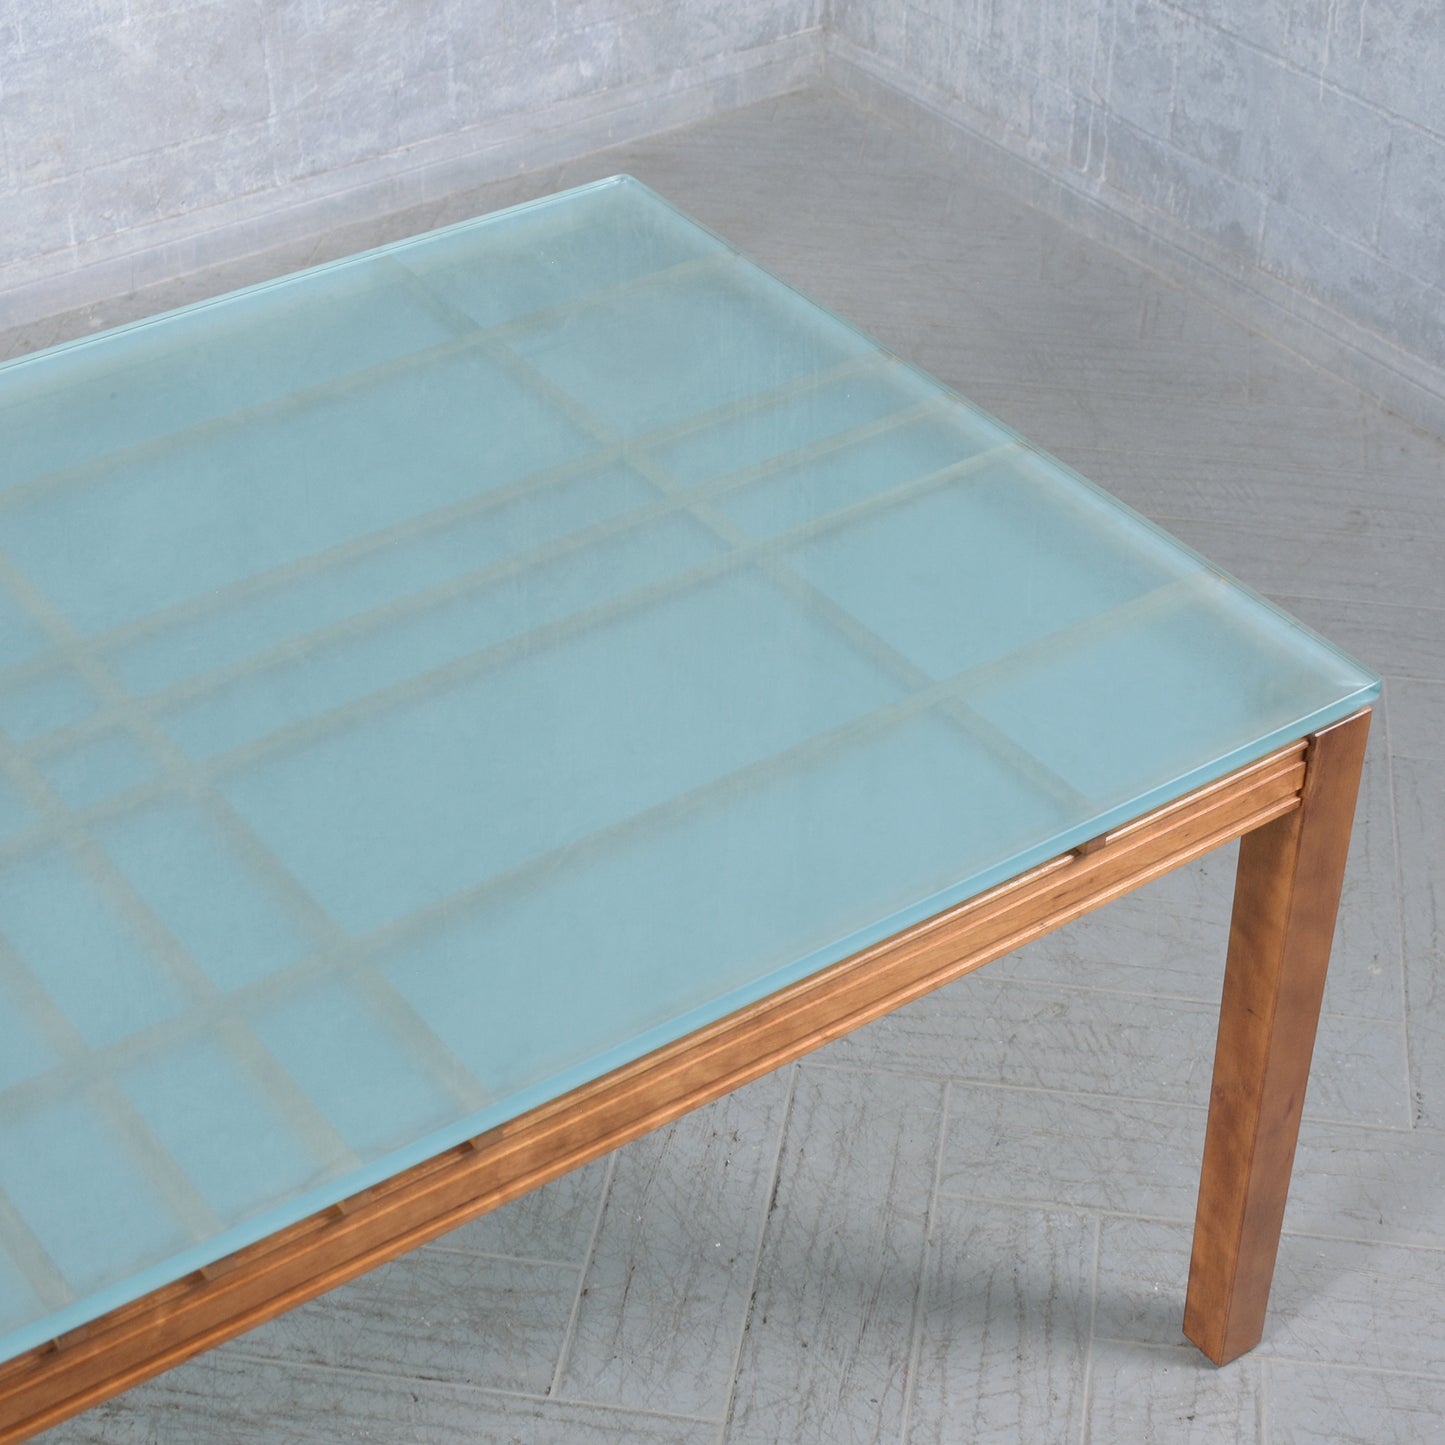 Vintage 1980s Mid Century Modern Dining Table: Solid Maple & Frosted Glass Top